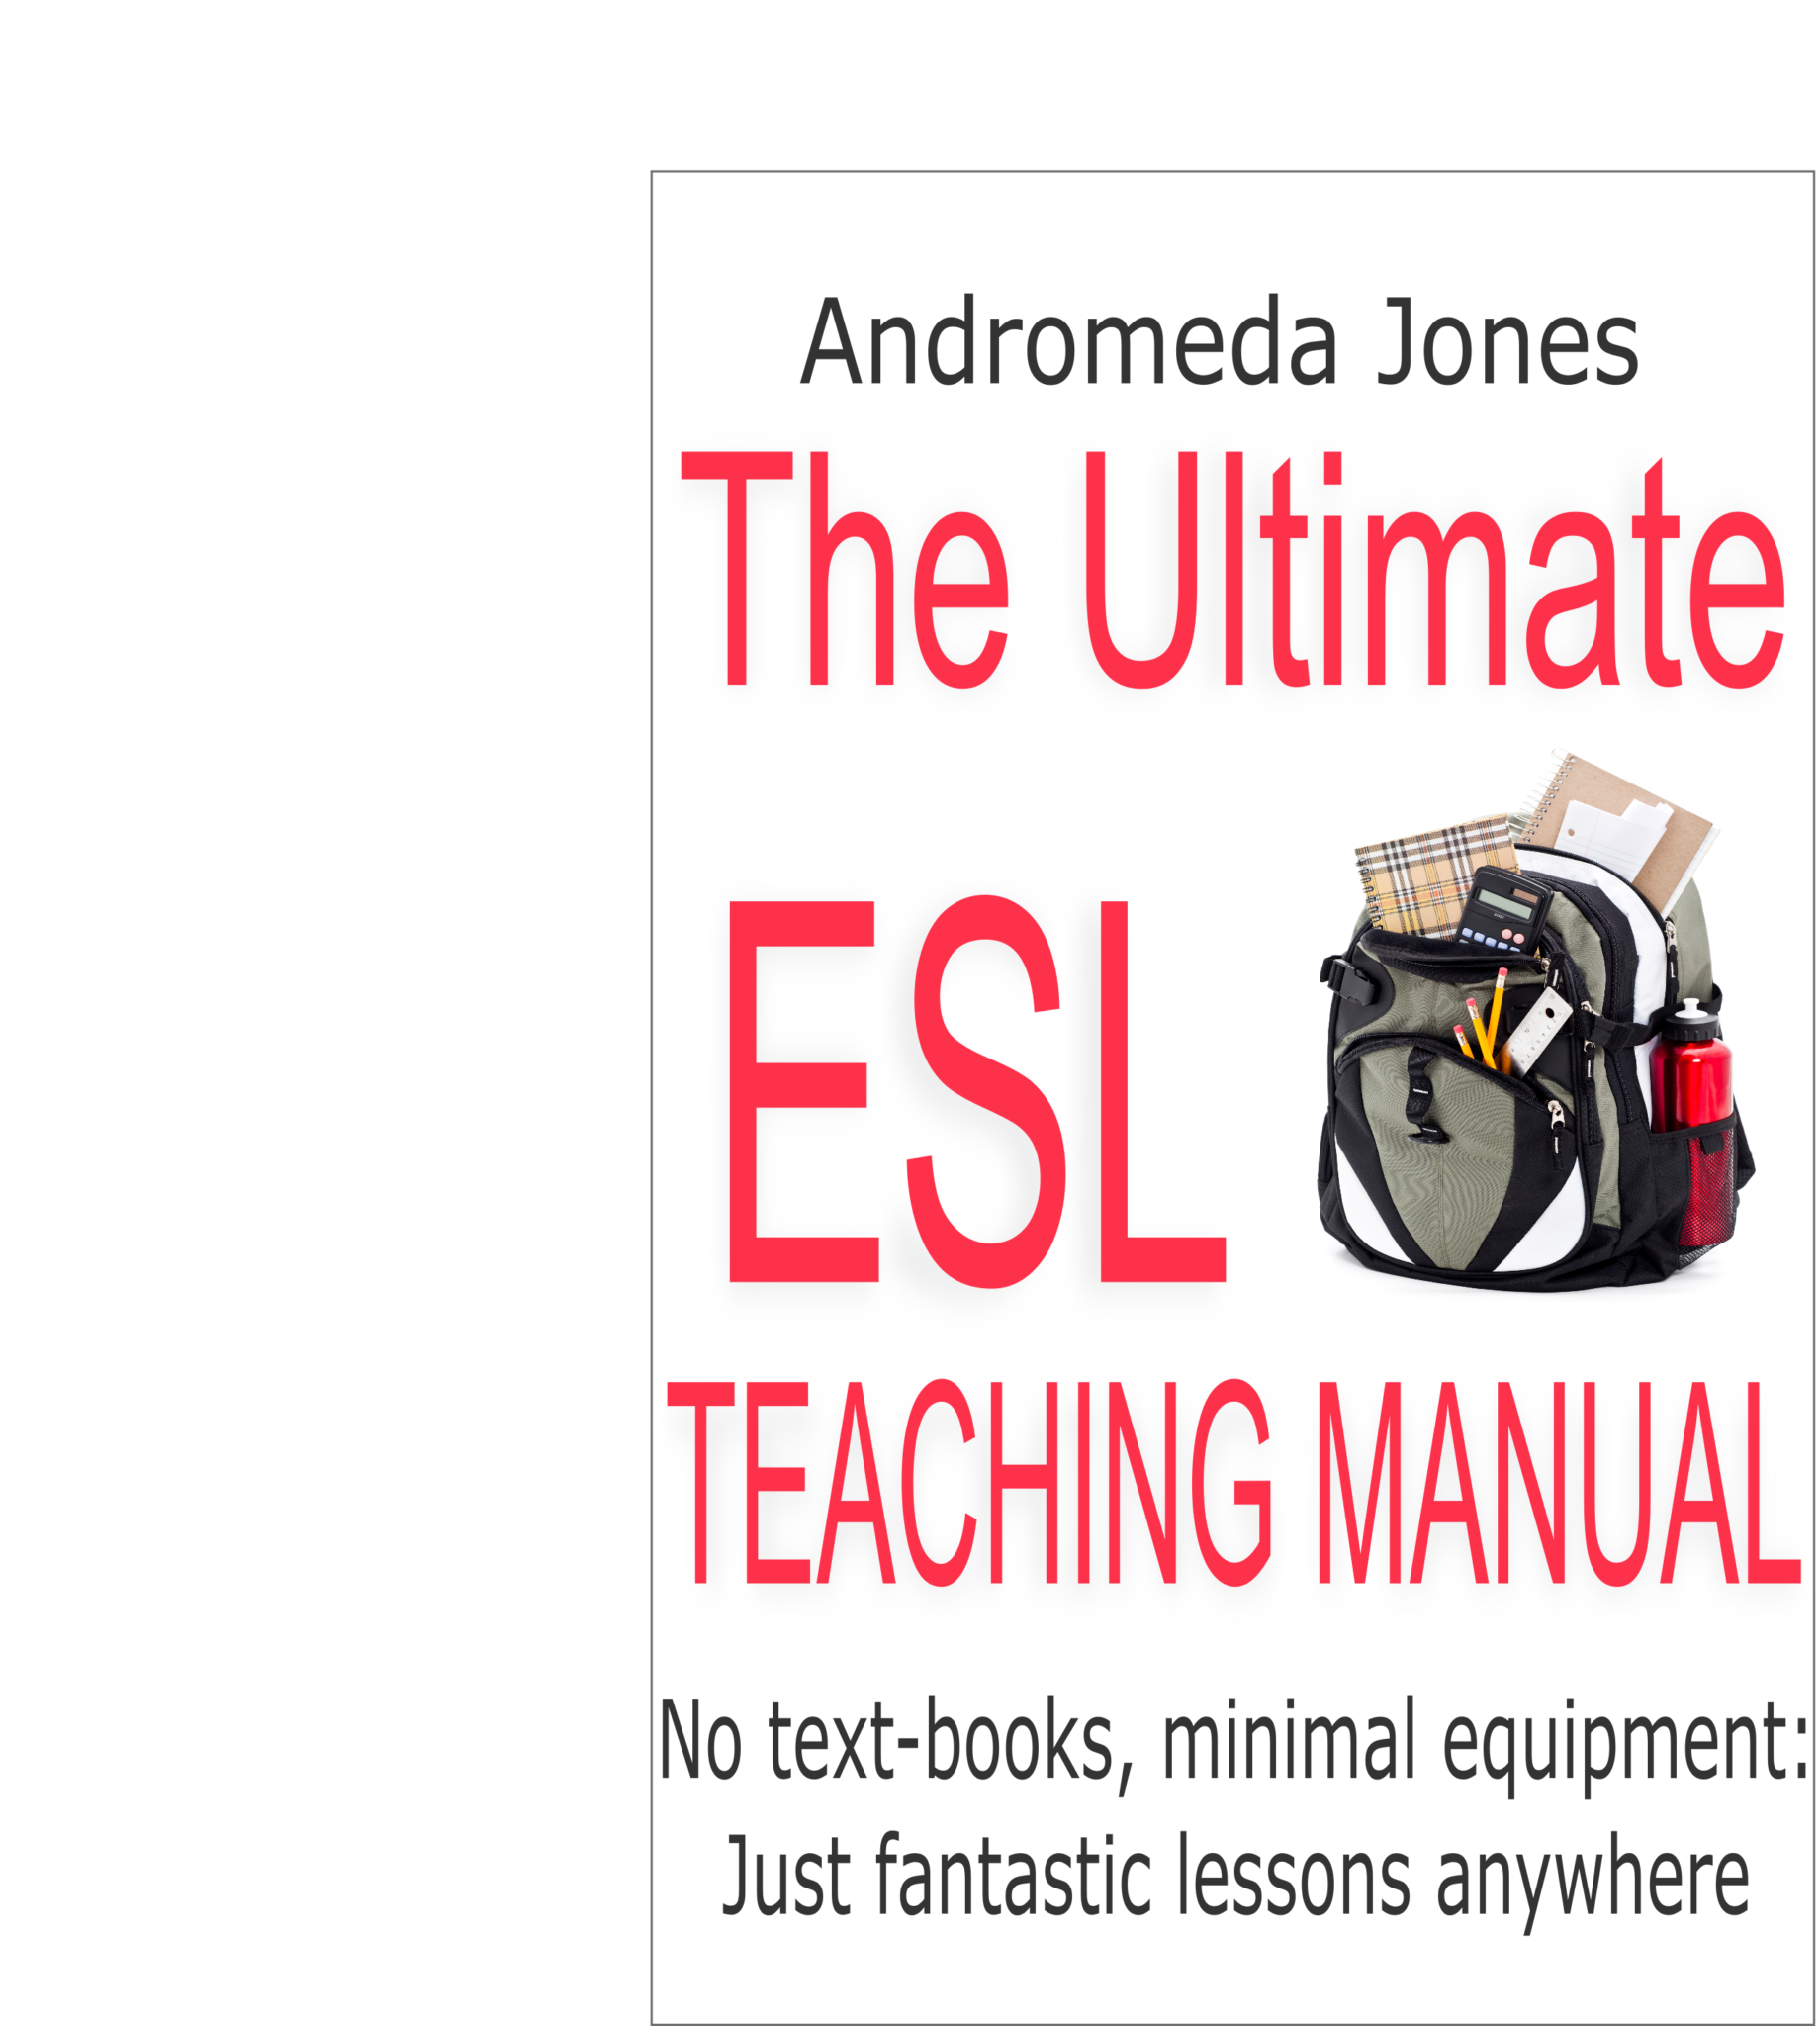 FREE: The Ultimate Teaching English as a Second Language Manual: No text-books, minimal equipment just fantastic lessons anywhere by Andromeda Jones